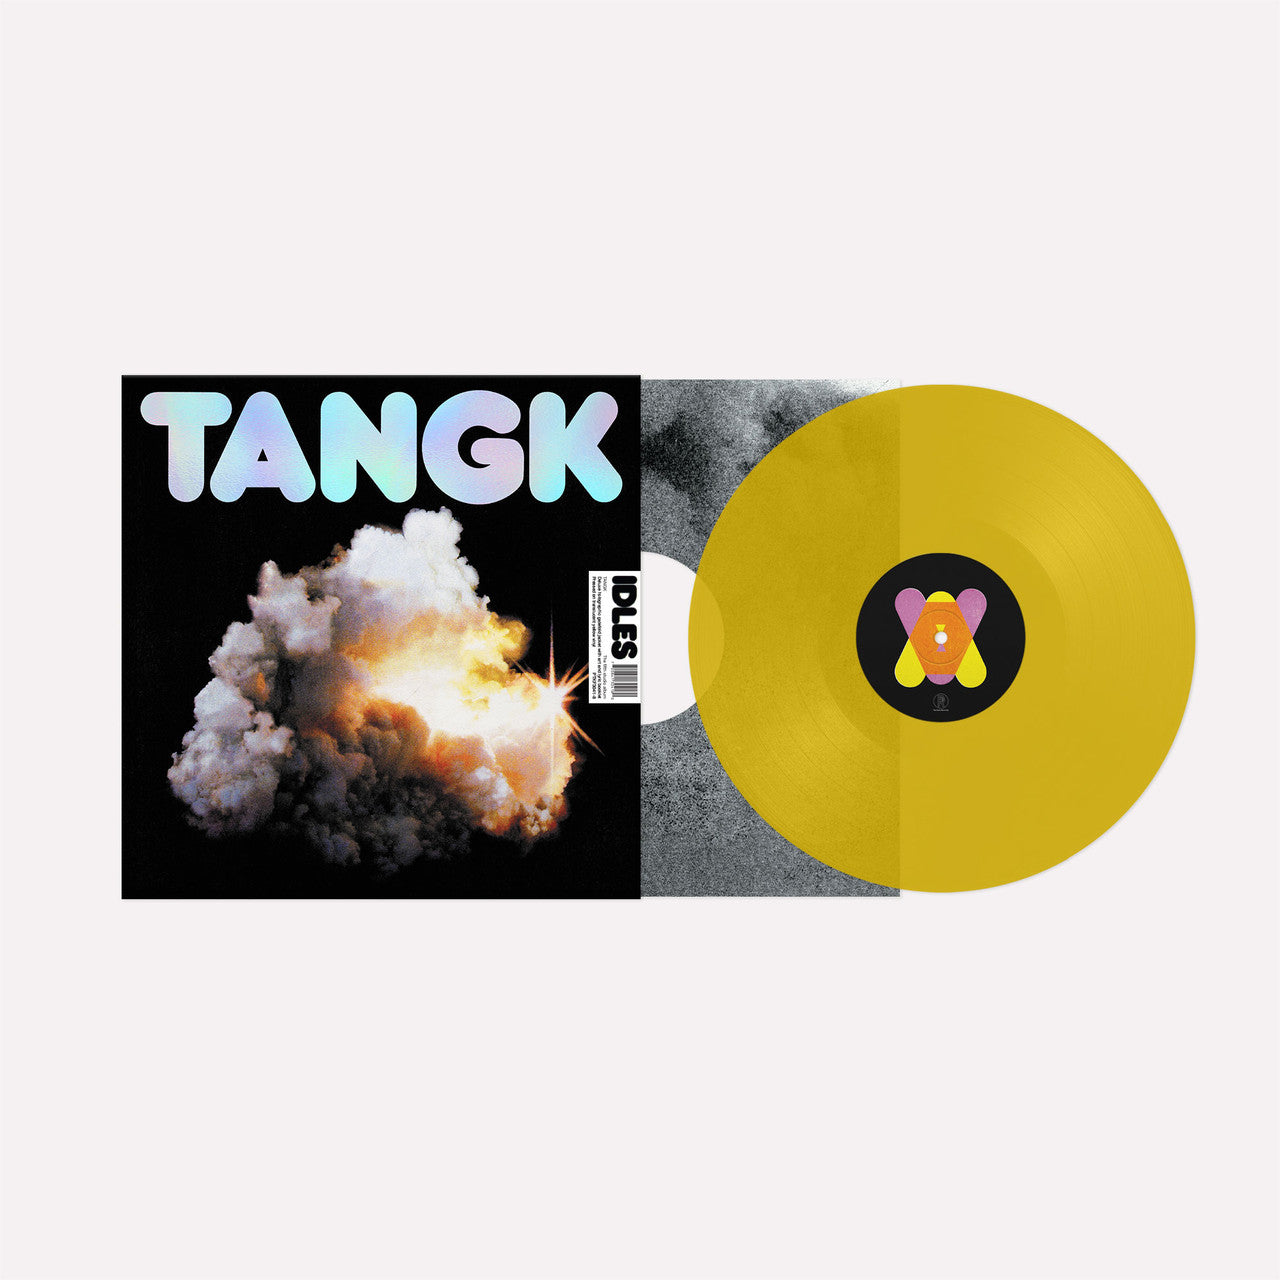 Buy IDLES - TANGK (Deluxe Edition Transparent Yellow Vinyl)